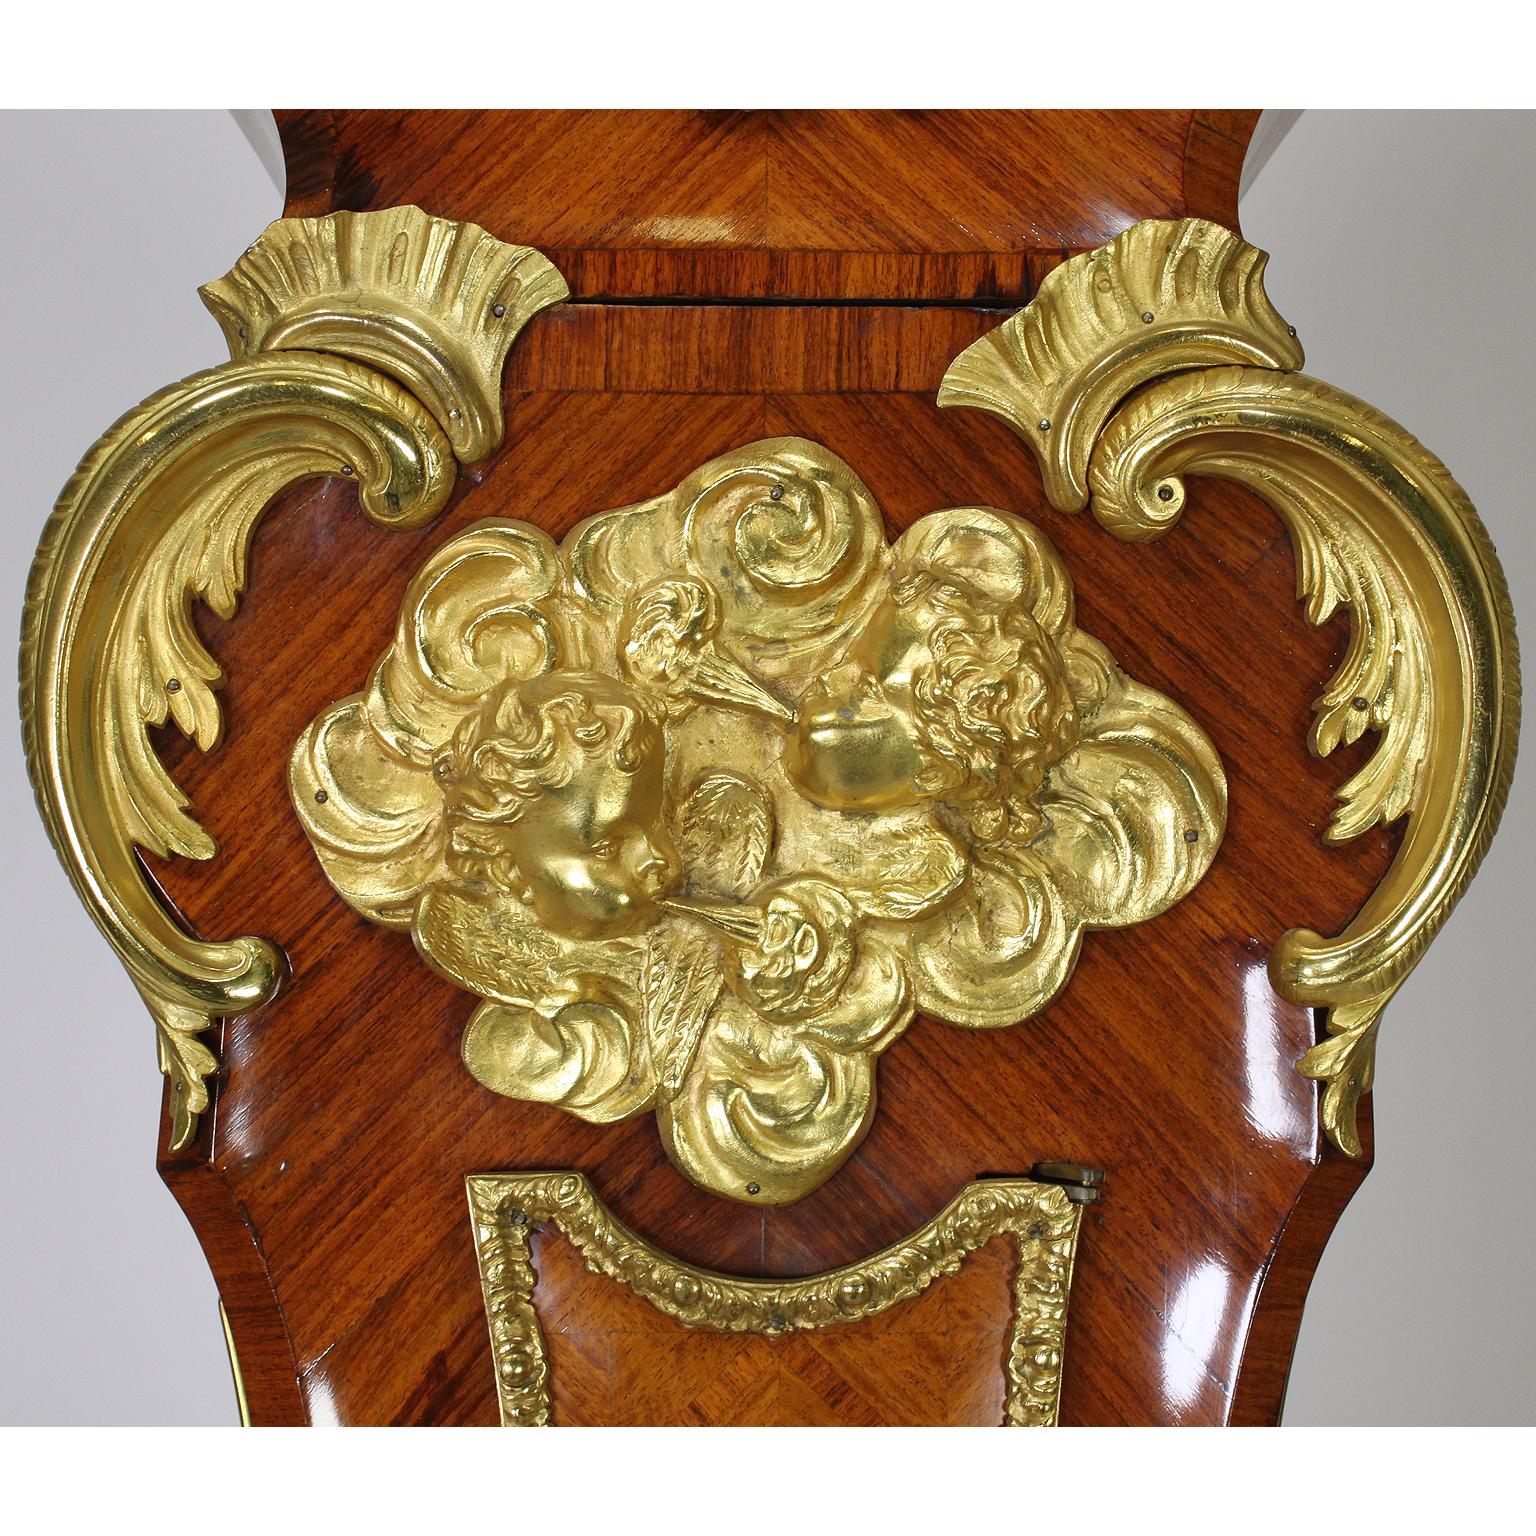 French 19th-20th Century Régence Style Gilt-Bronze Mounted Longcase Clock For Sale 1